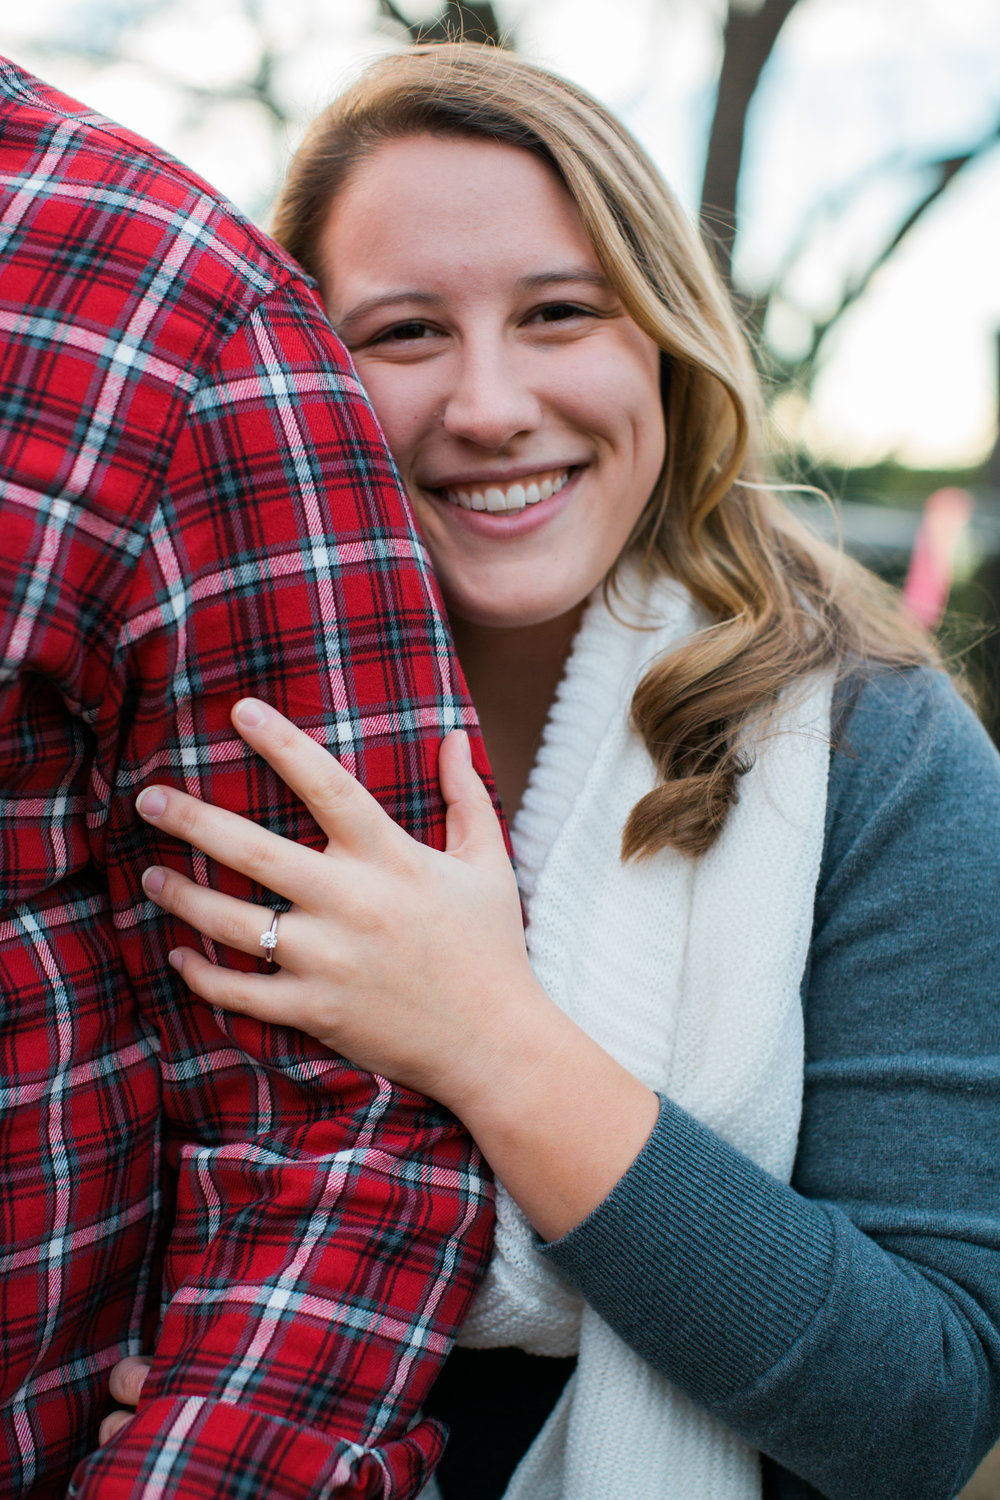 Megan Smiling and showing her engagement ring